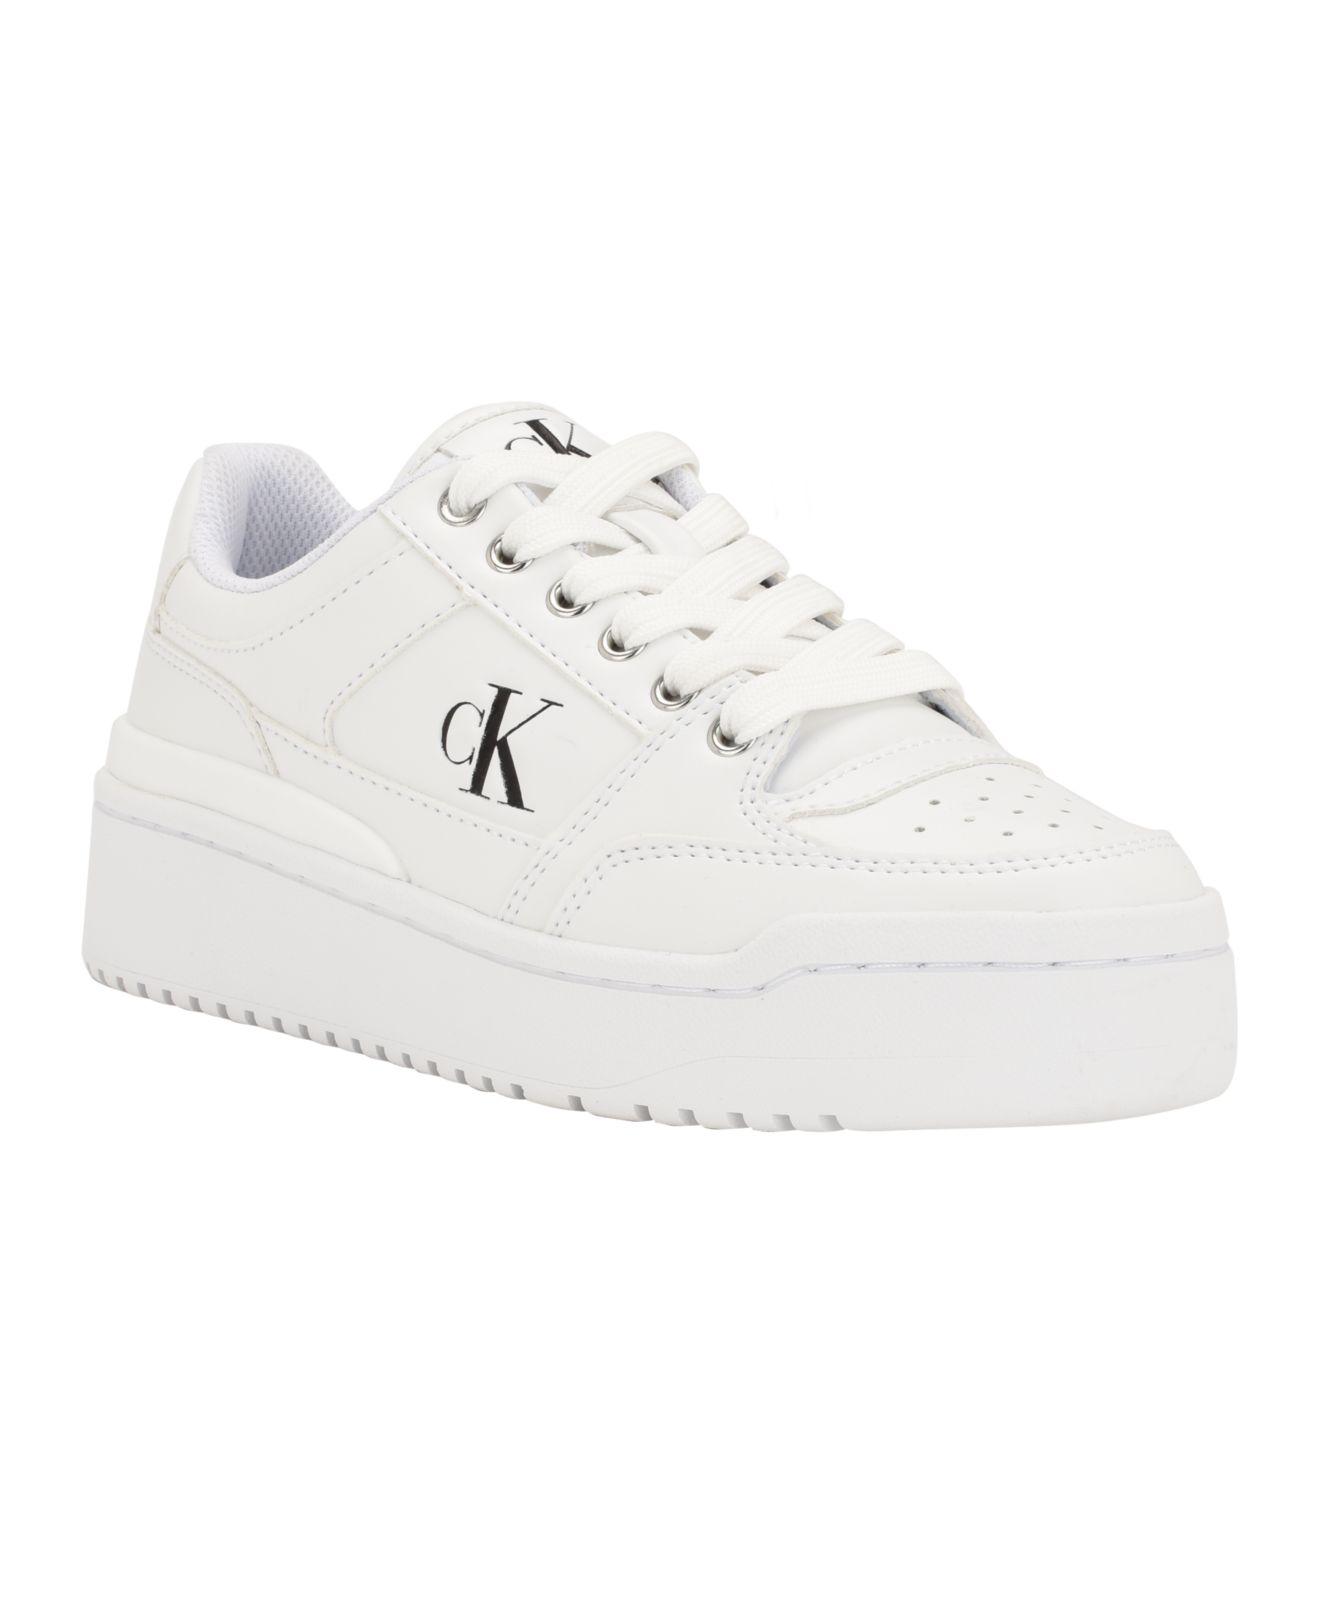 Calvin Klein Alondra Casual Platform Lace-up Sneakers in White | Lyst